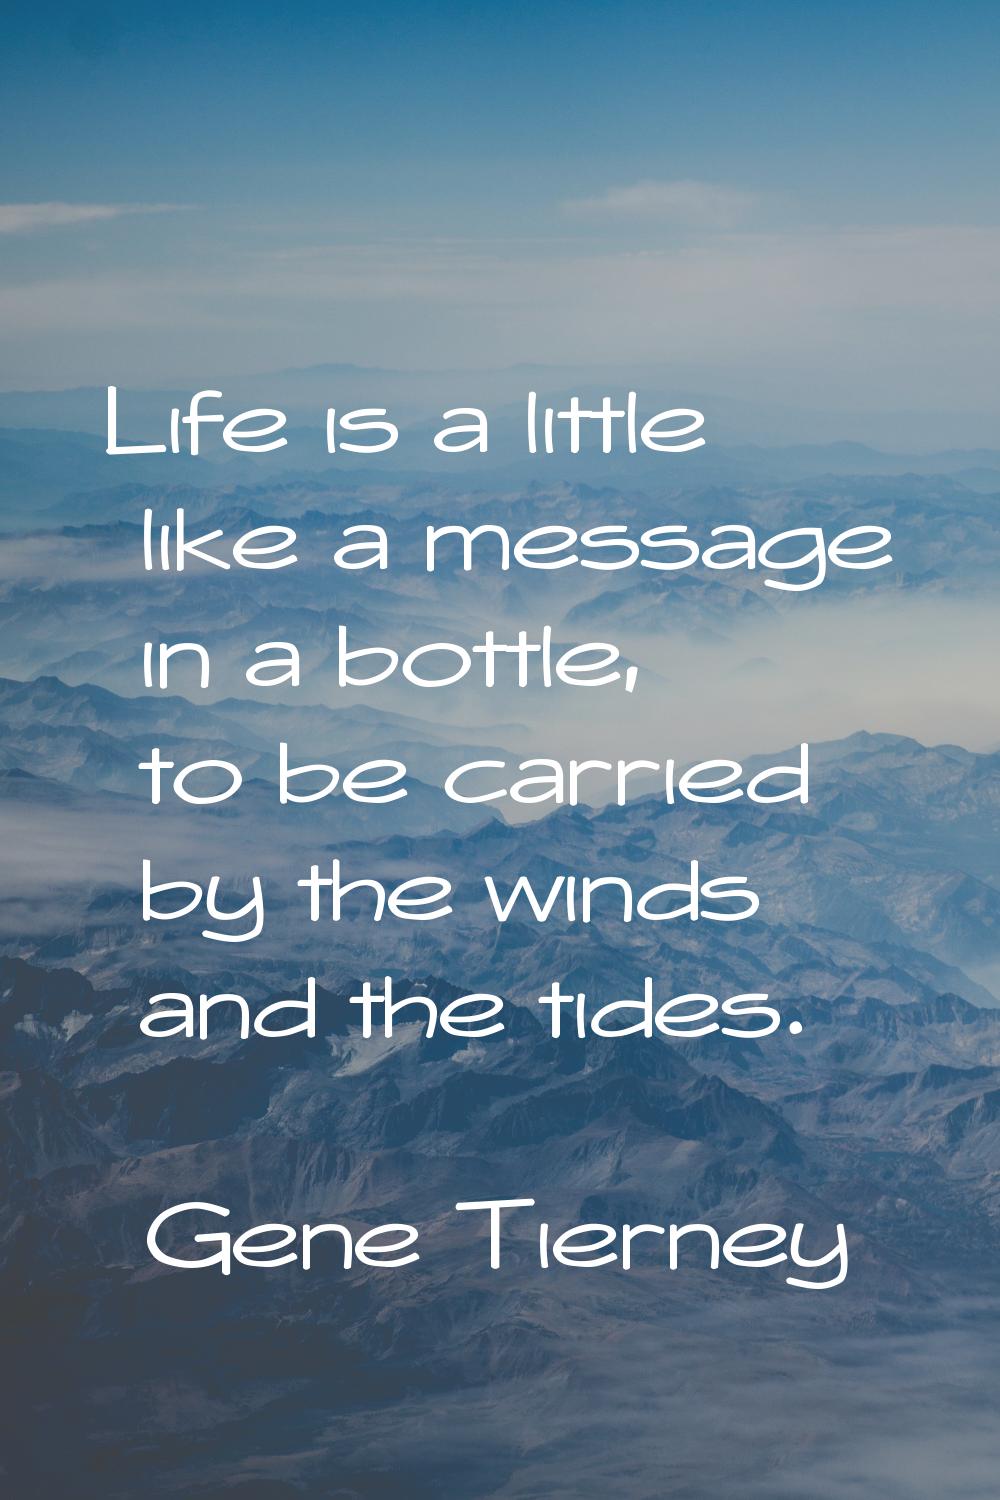 Life is a little like a message in a bottle, to be carried by the winds and the tides.